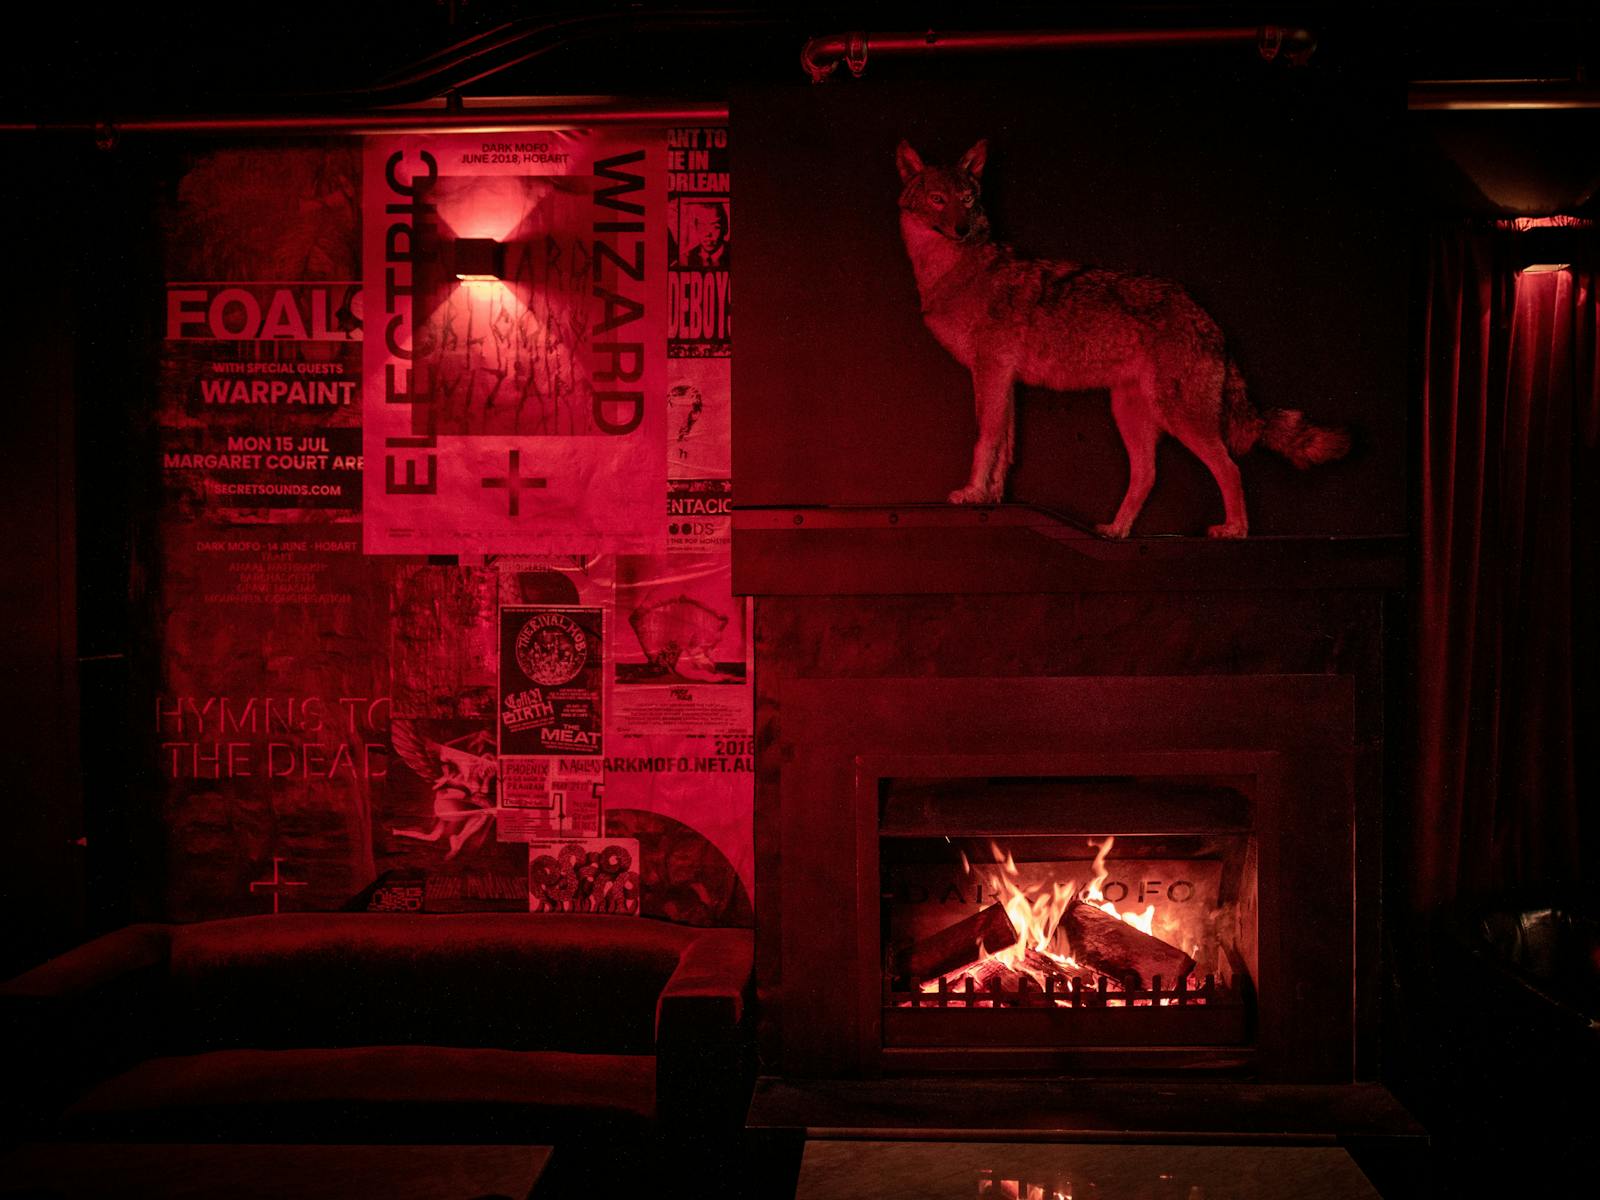 A taxidermy coyote stands on a shelf above a roaring fireplace in the red-lit Altar lounge bar